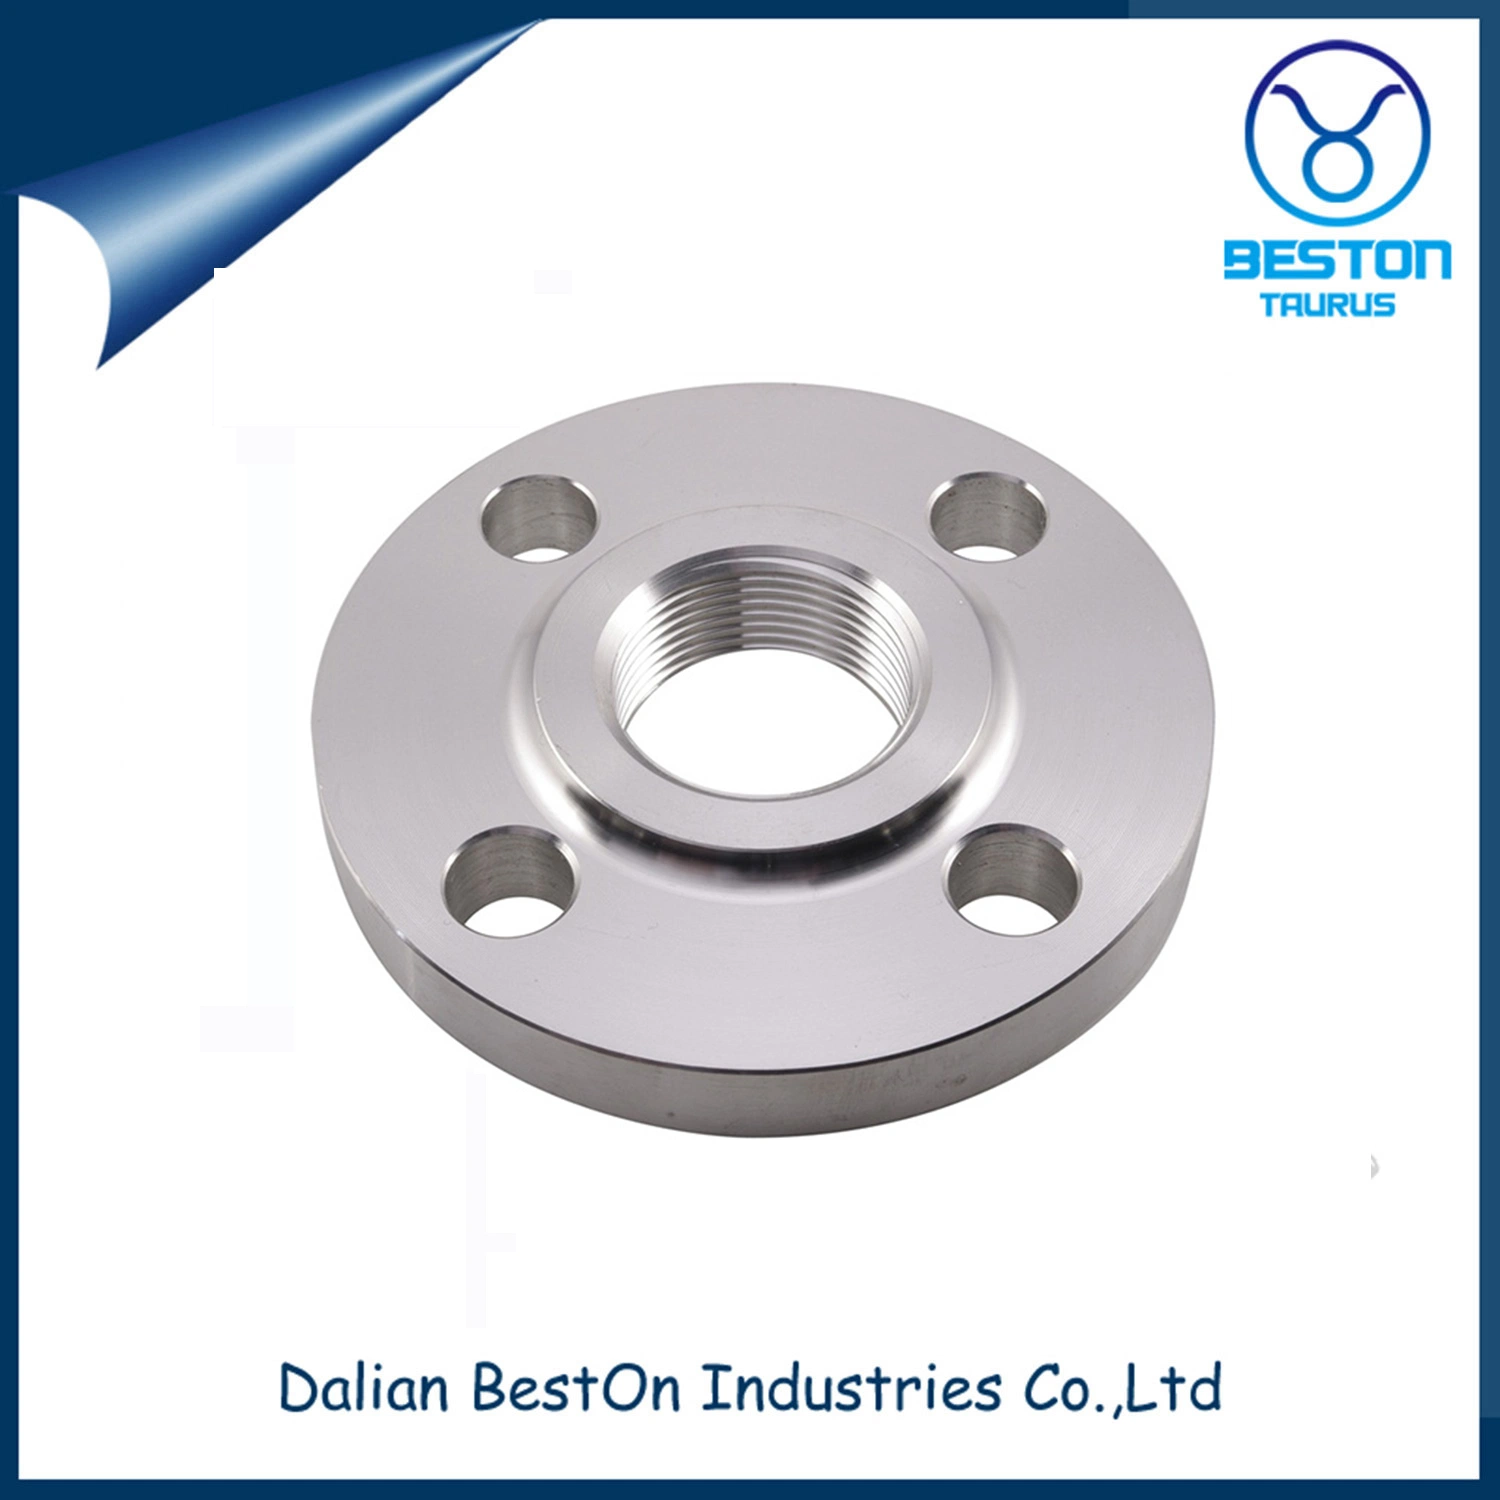 ANSI B16.5 Hot Dipped Galvanized Surface Welding Neck Flanges